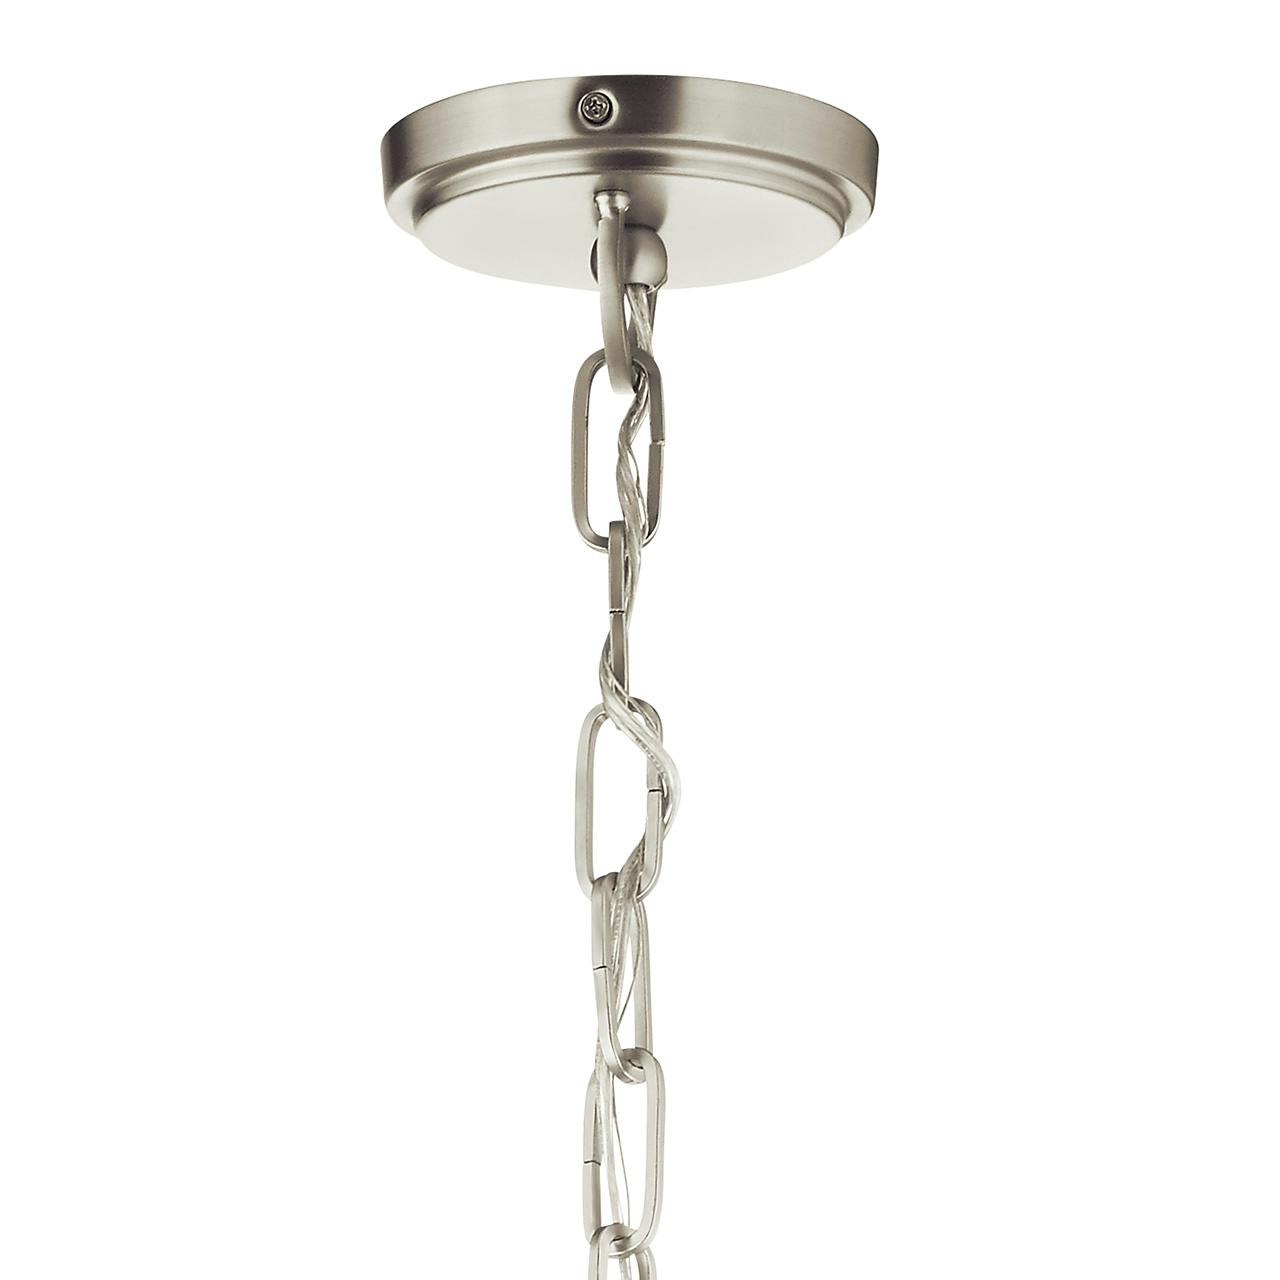 Canopy for the Montauk 3 Light Pendant in White on a white background